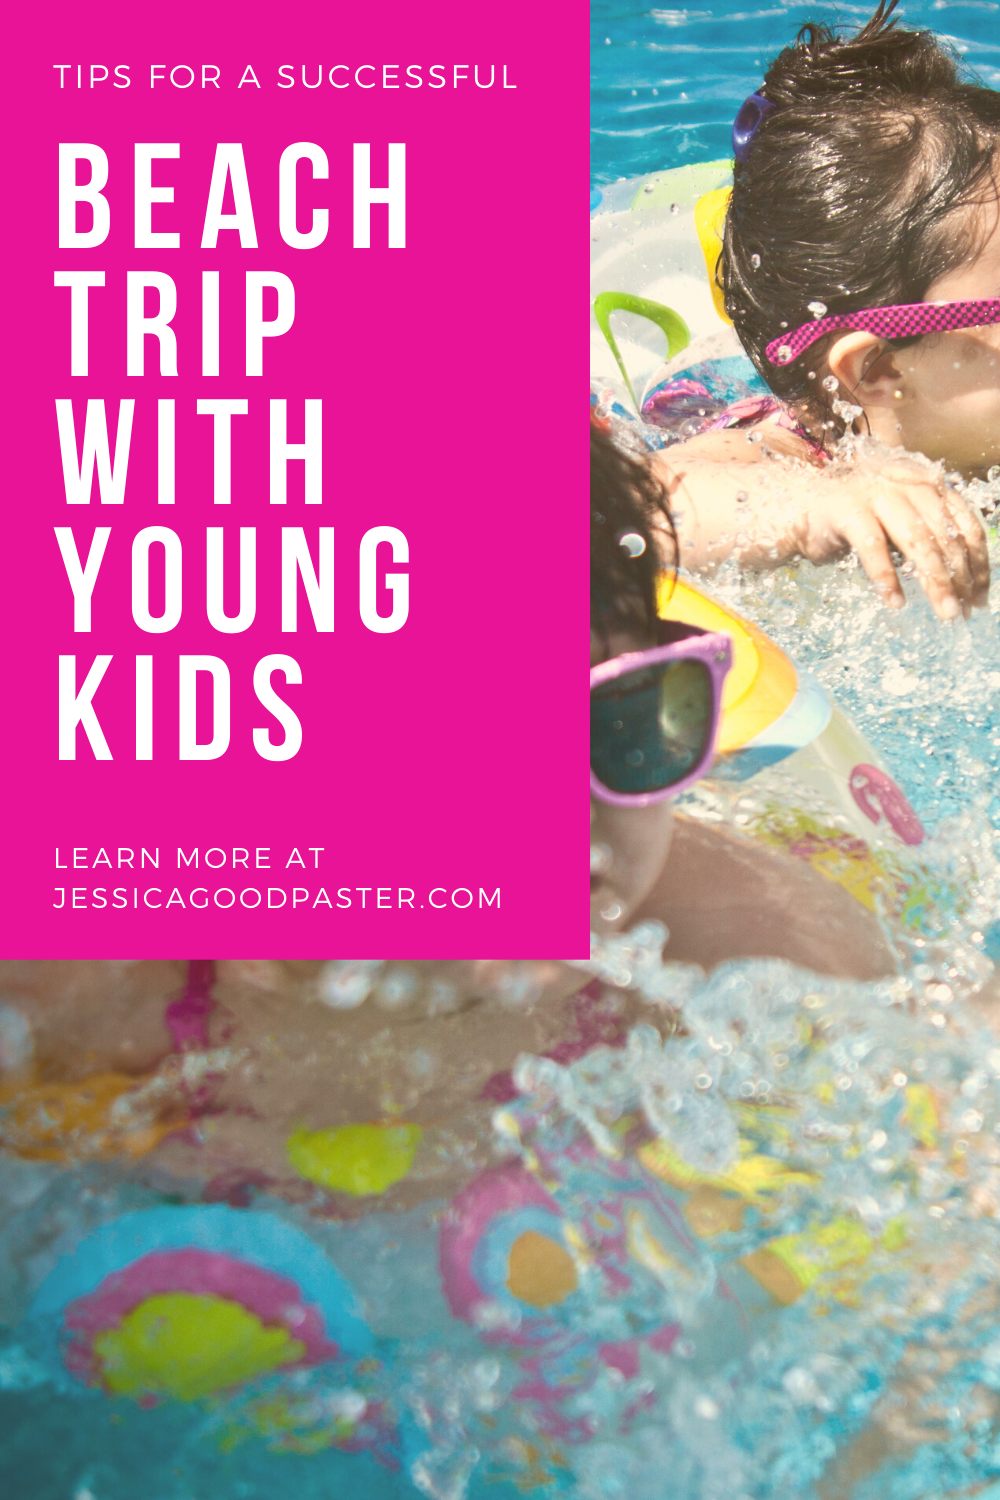 8 Tips for a Successful Beach Vacation with Young Kids. Enjoy your trip to the beach with these ideas to make traveling with babies, toddlers, and preschoolers much easier. #travel #vacation #beach #kidsactivities